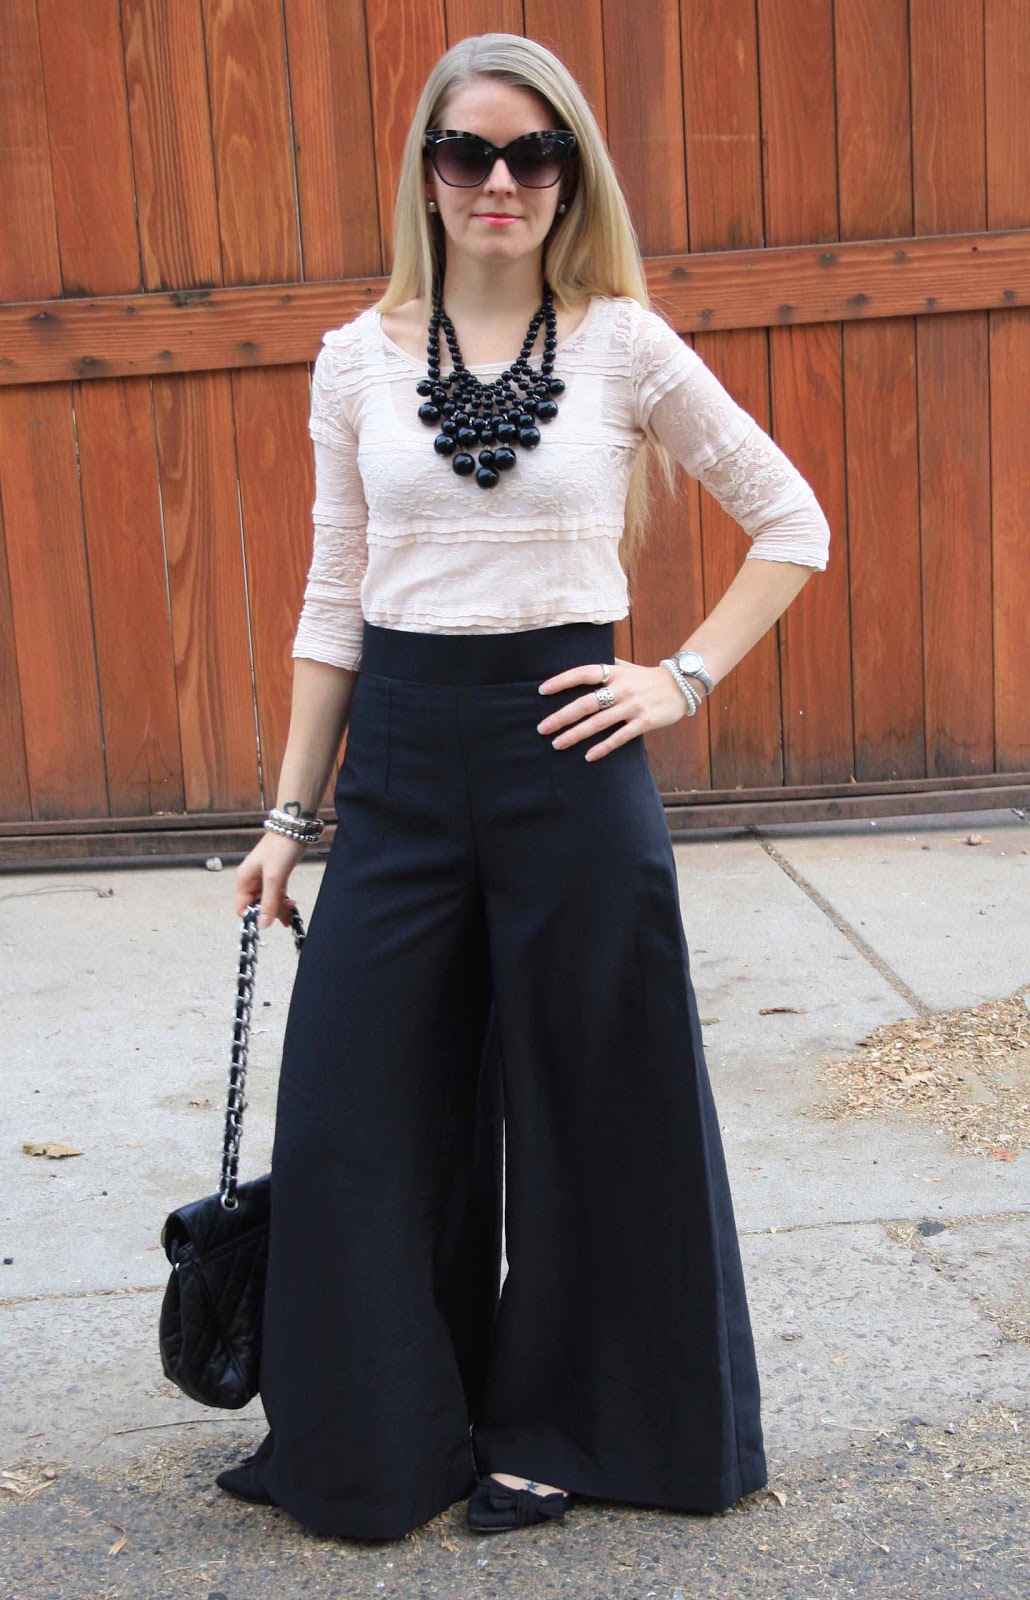 Citizen of the World: Wide Trousers and Lace!